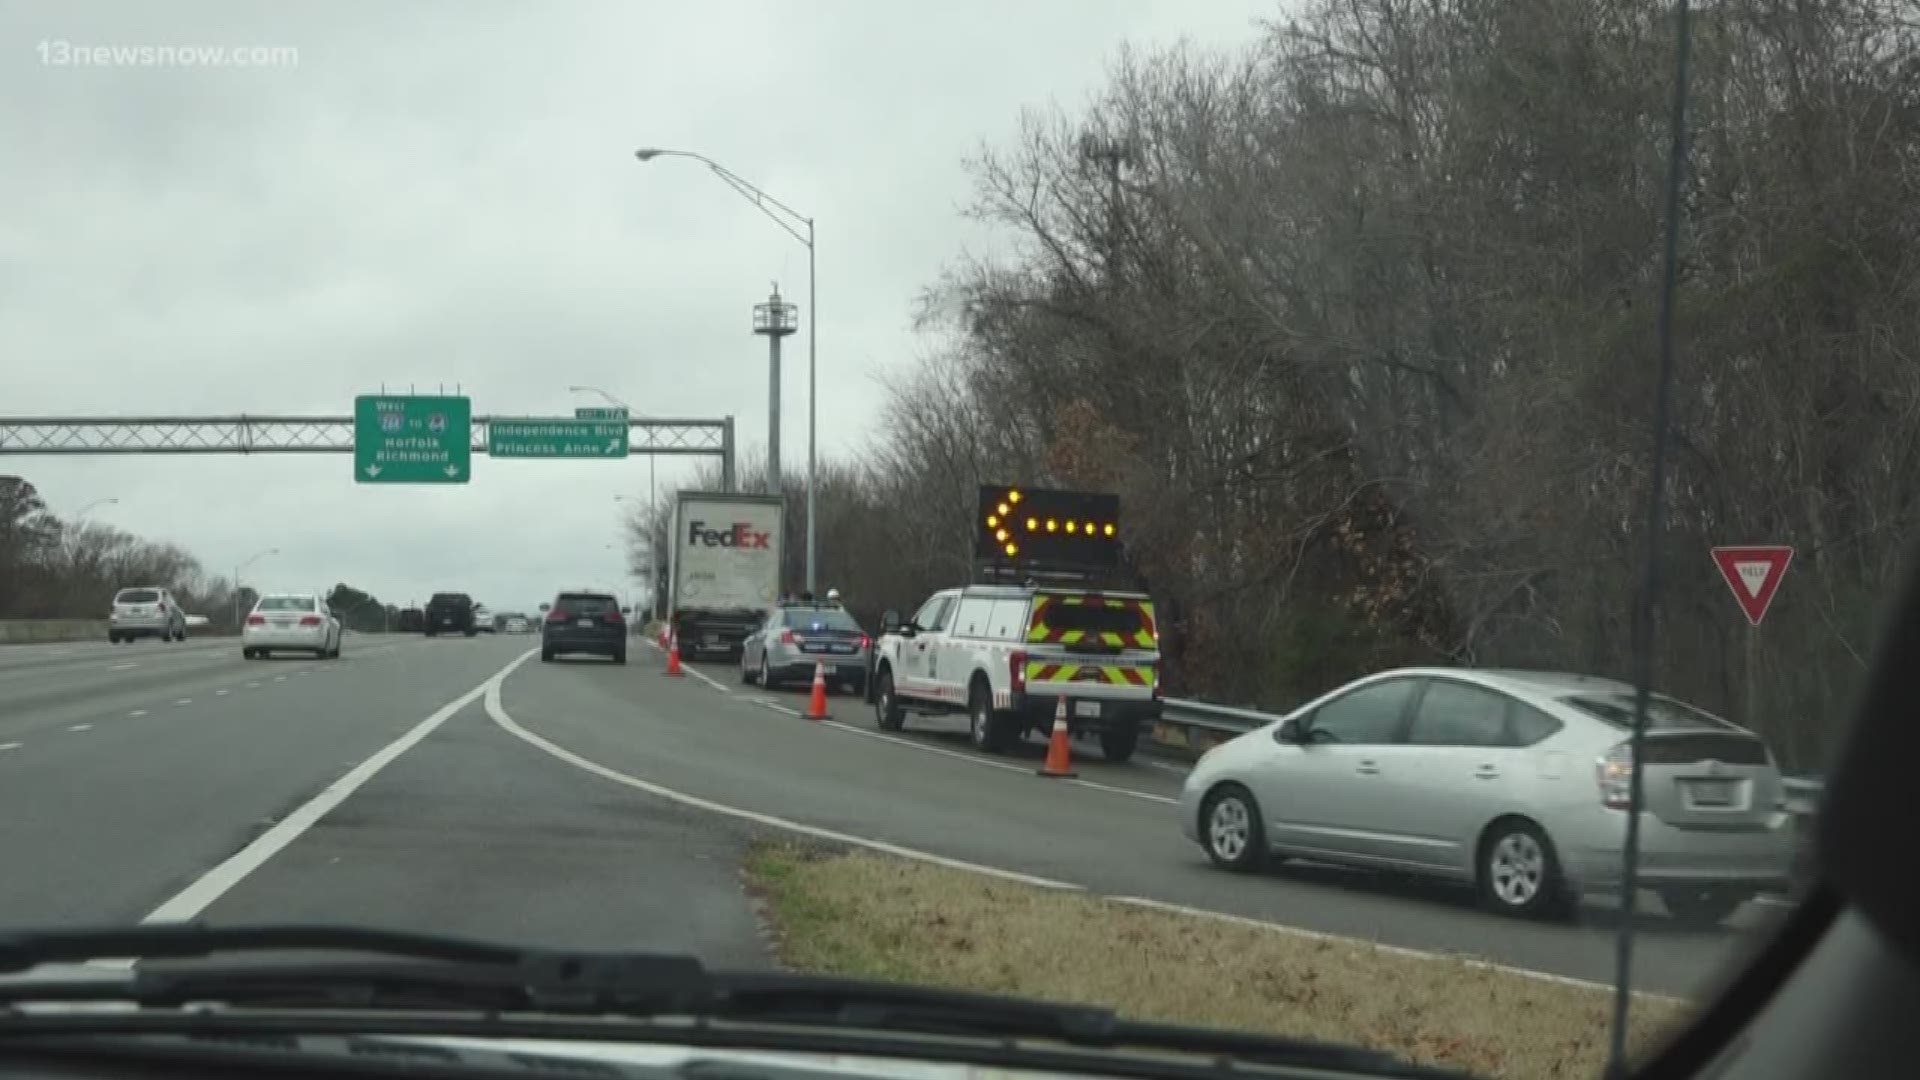 13News Now Ali Weatherton has more info on the push from VDOT to drivers telling them to move over when they see roadwork or emergency vehicles.